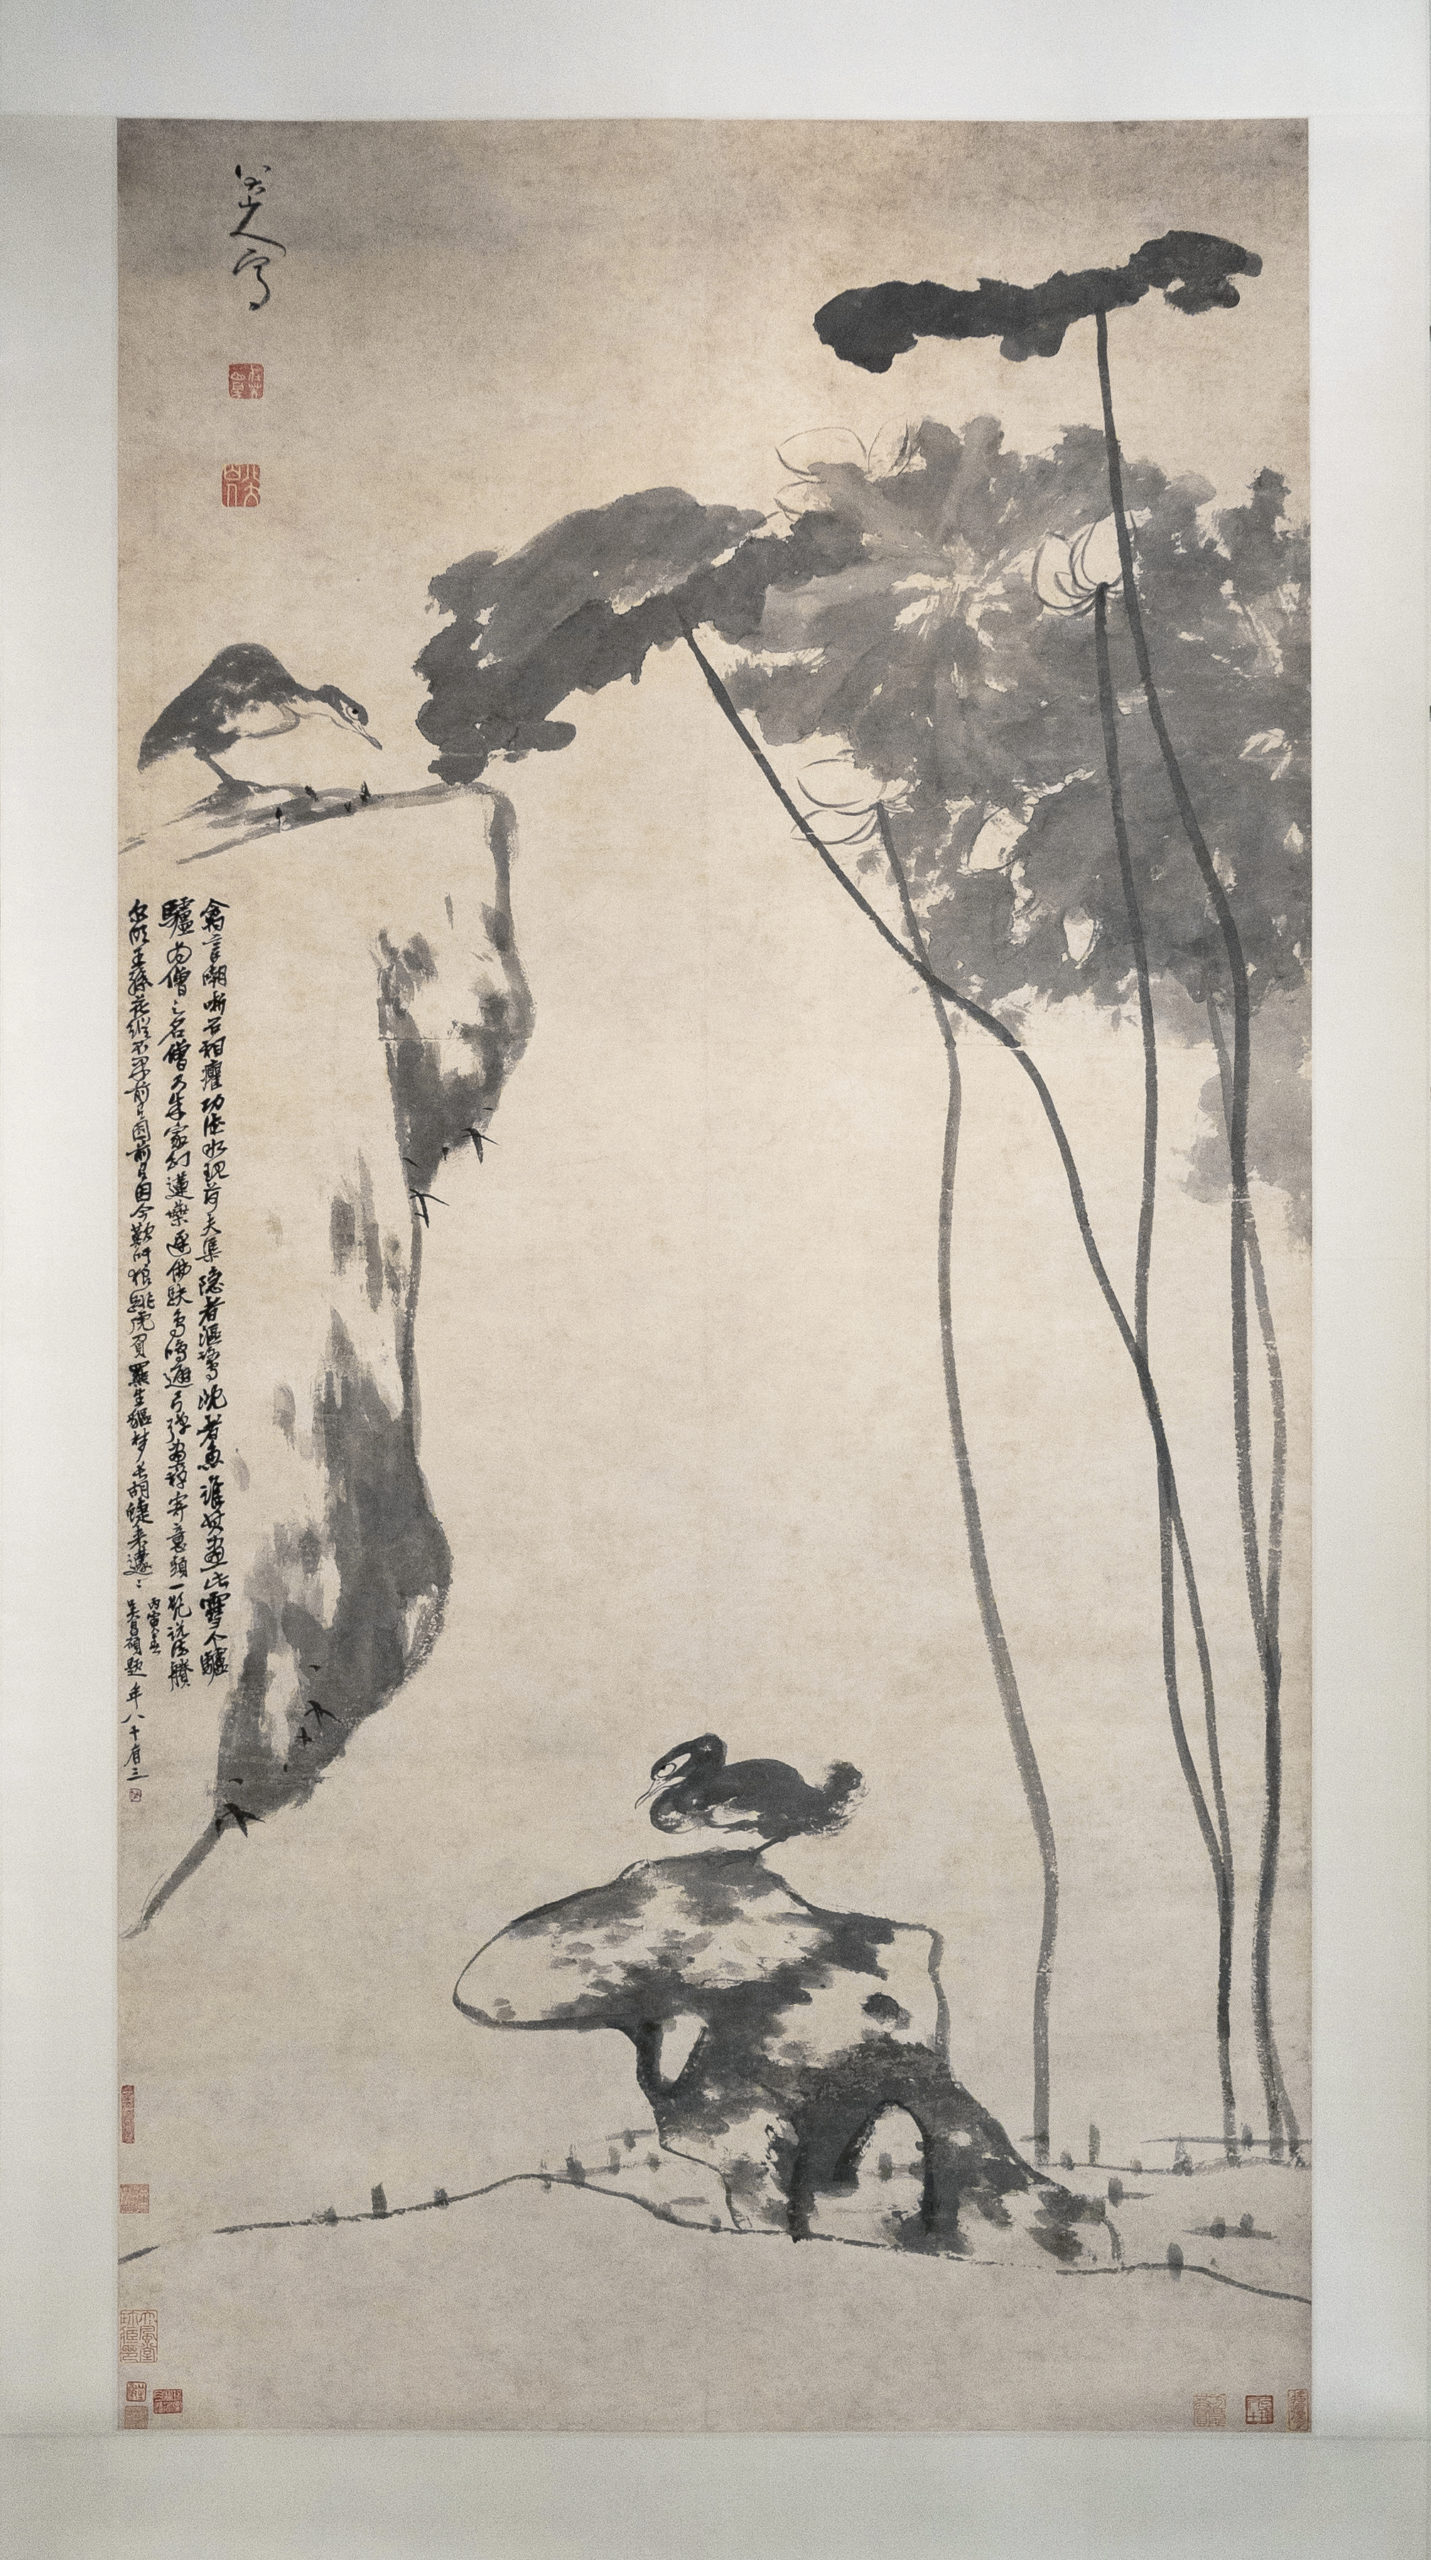 Bada Shanren 八大山人 (朱耷), Lotus and Ducks (colophon by Wu Changshuo 吳昌碩), c. 1696 (Qing dynasty), ink on paper (hanging scroll), image 185 x 95.8 cm (Freer Gallery of Art and Arthur M. Sackler Gallery, Smithsonian Institution)